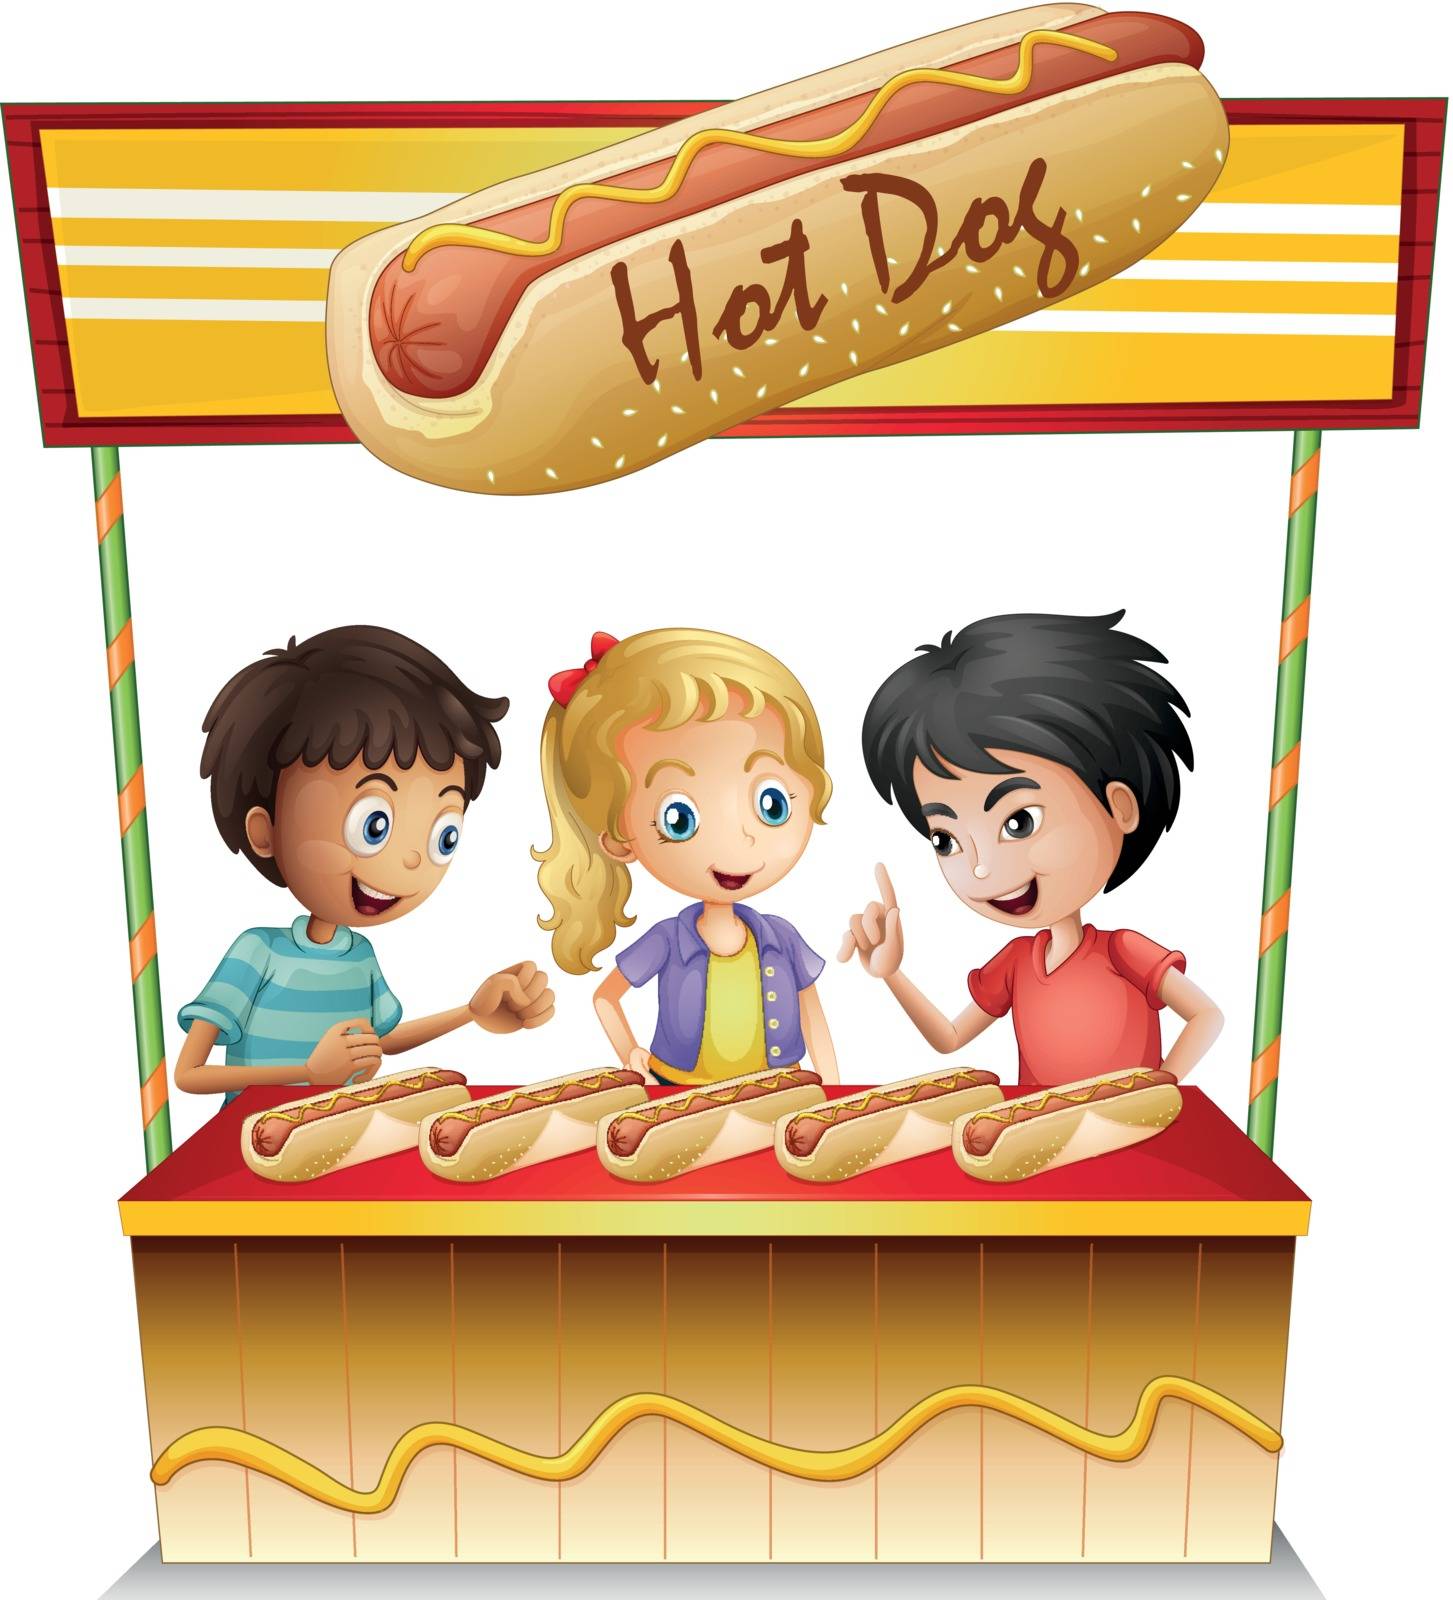 Illustration of the three kids in a hotdog stand on a white background